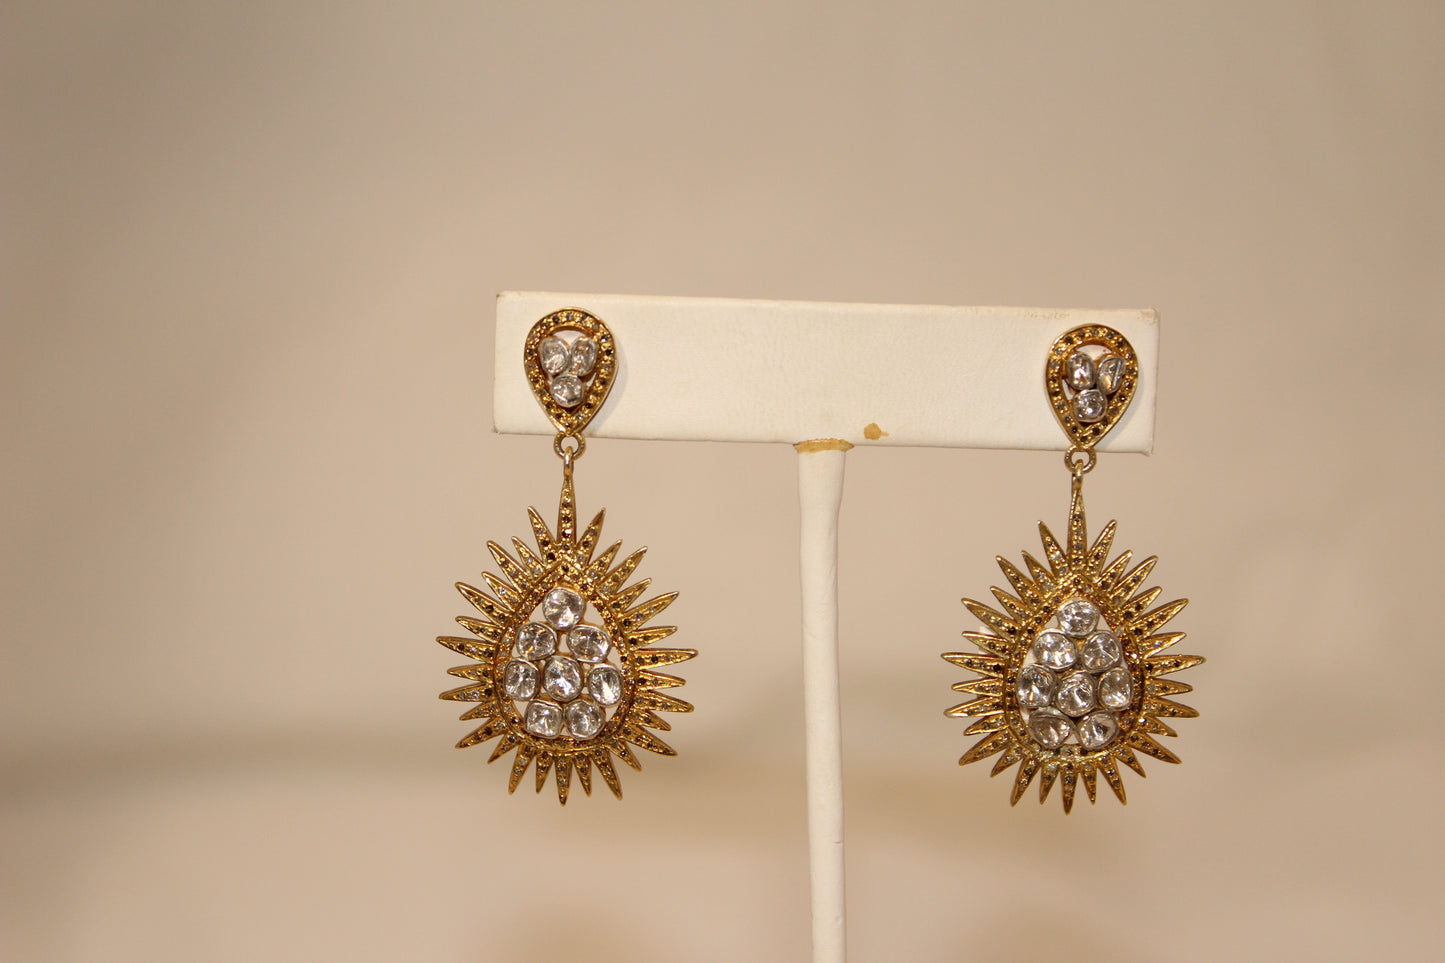 Gold and rose cut diamond tear drop with spiked edge earrings Sourced in India